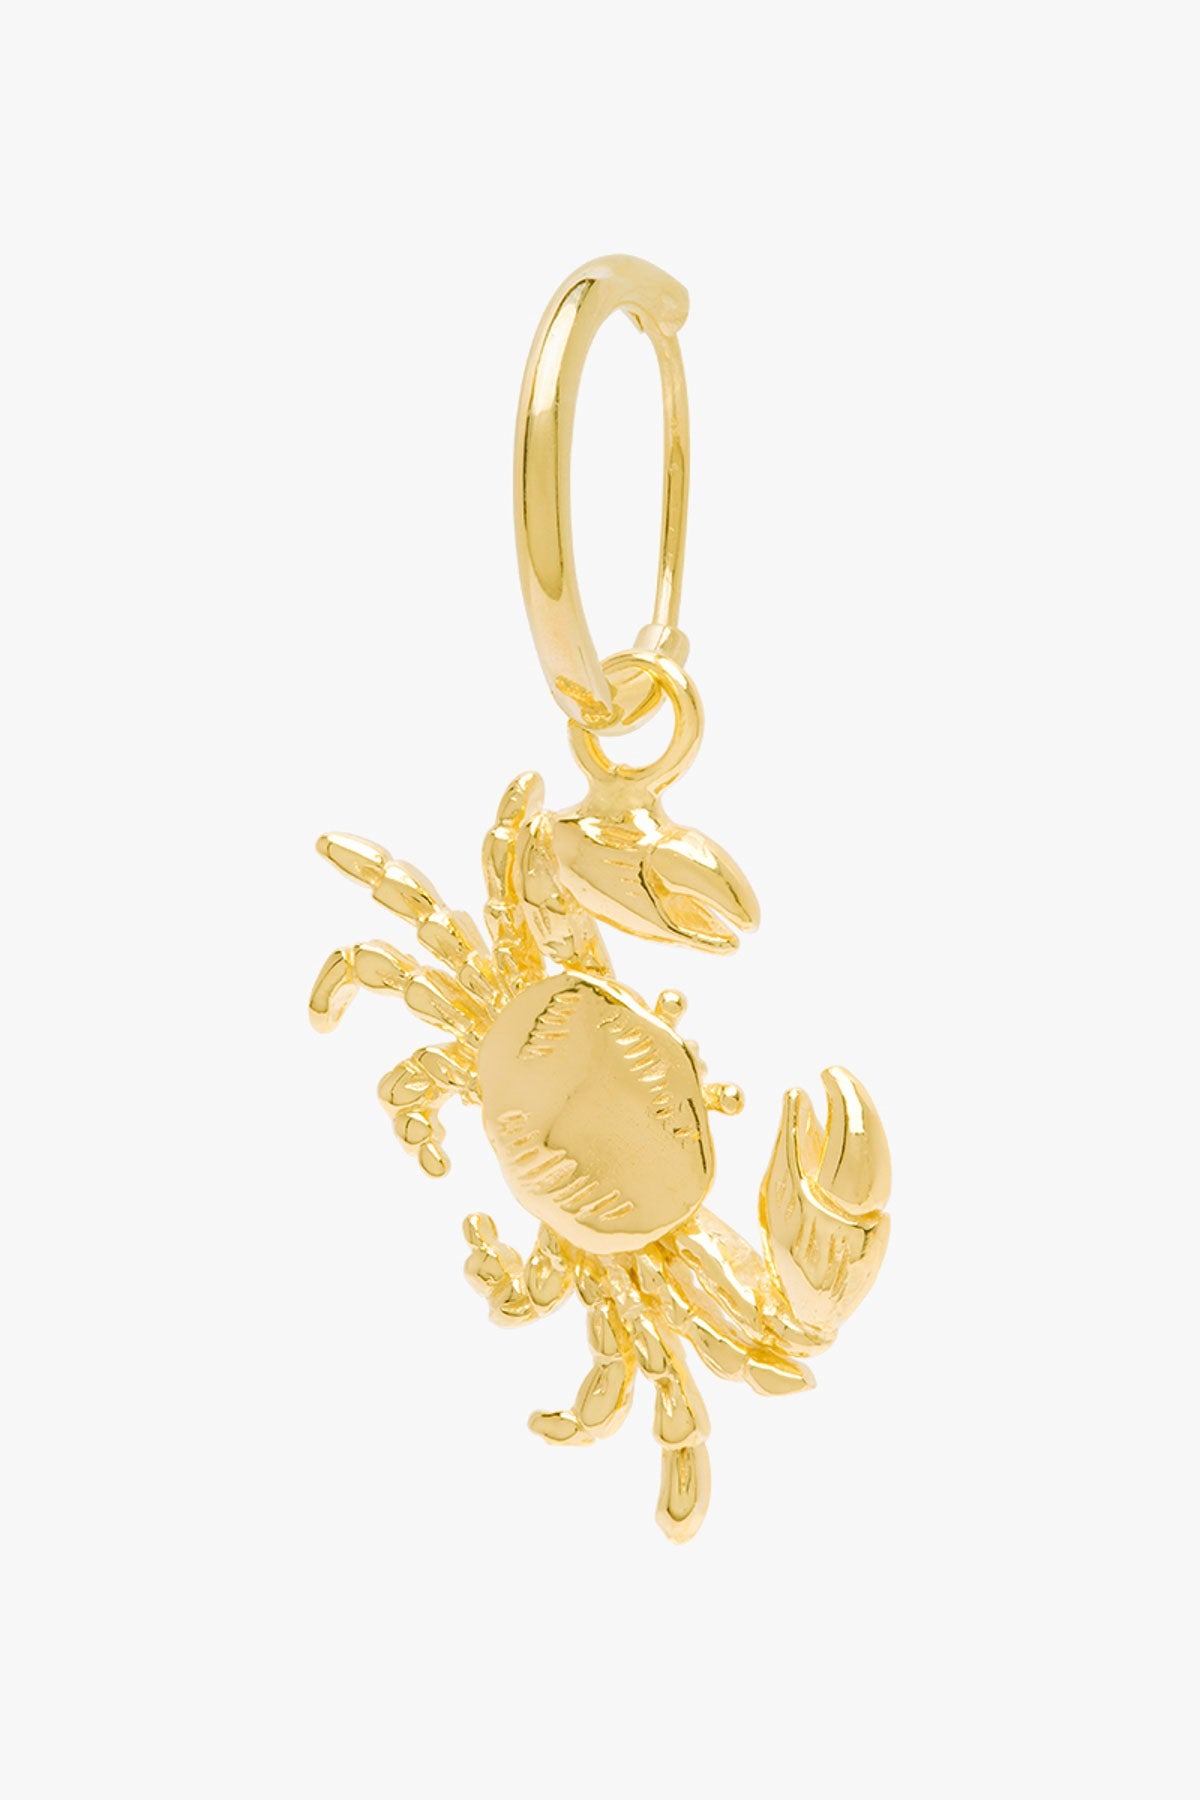 wildthings collectables - Crab earring gold plated